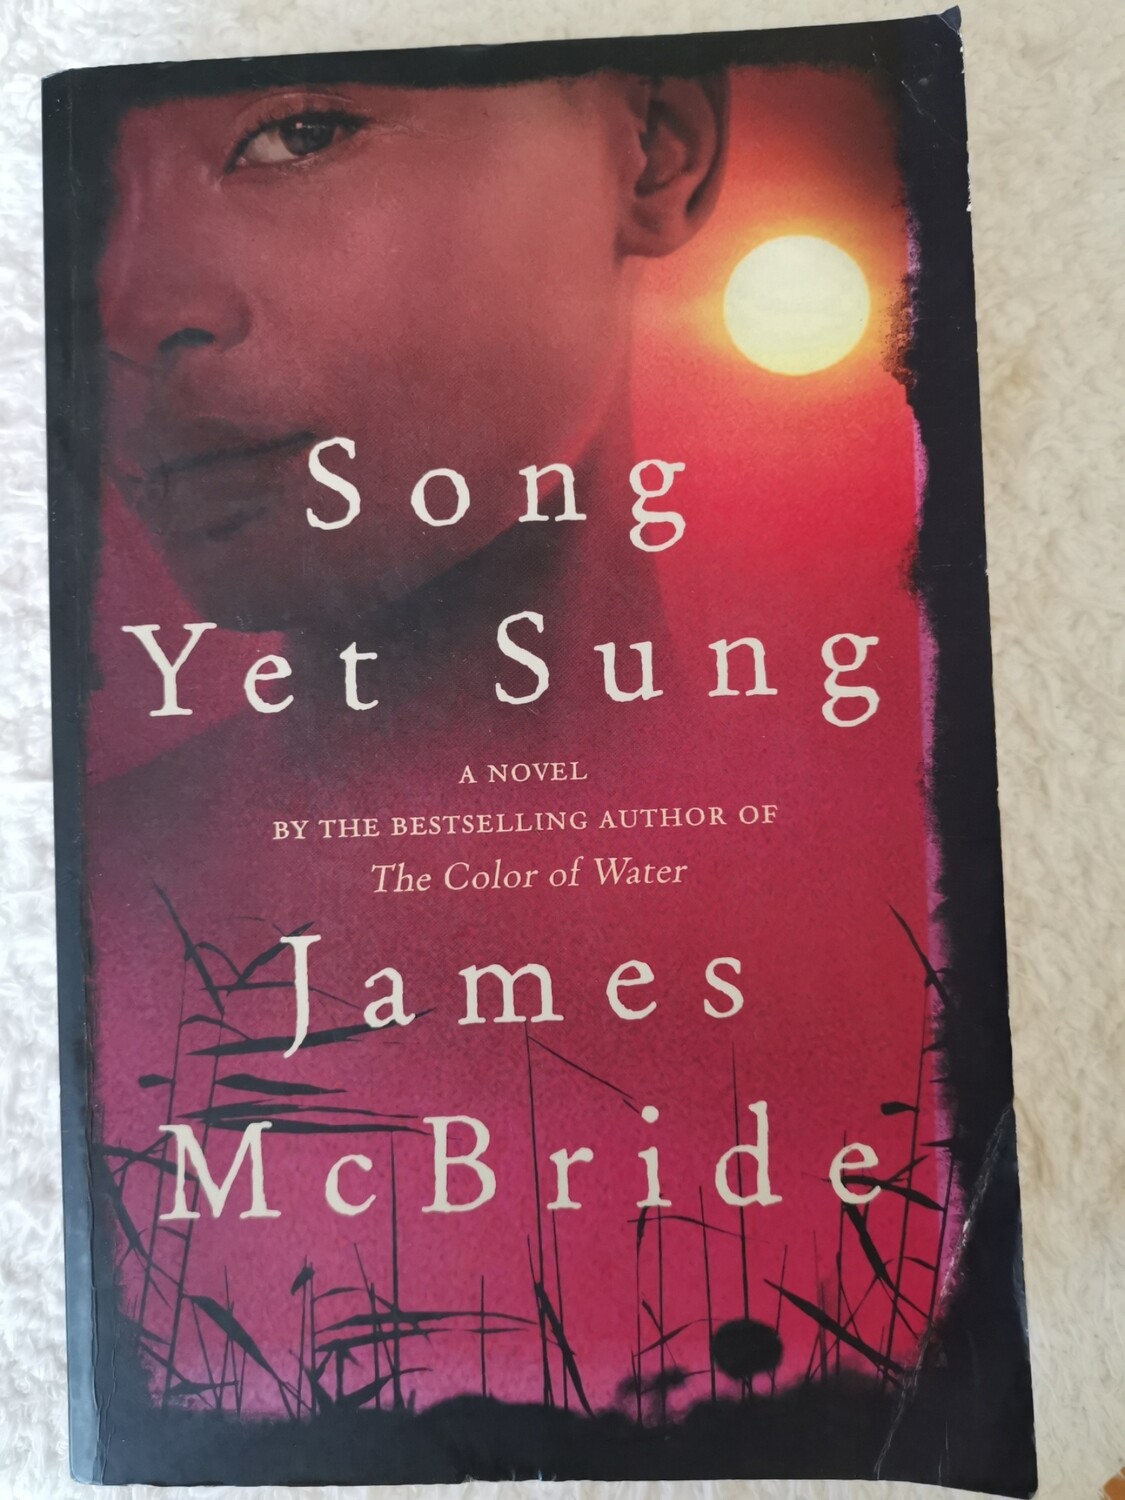 Song yet sung, James McBride